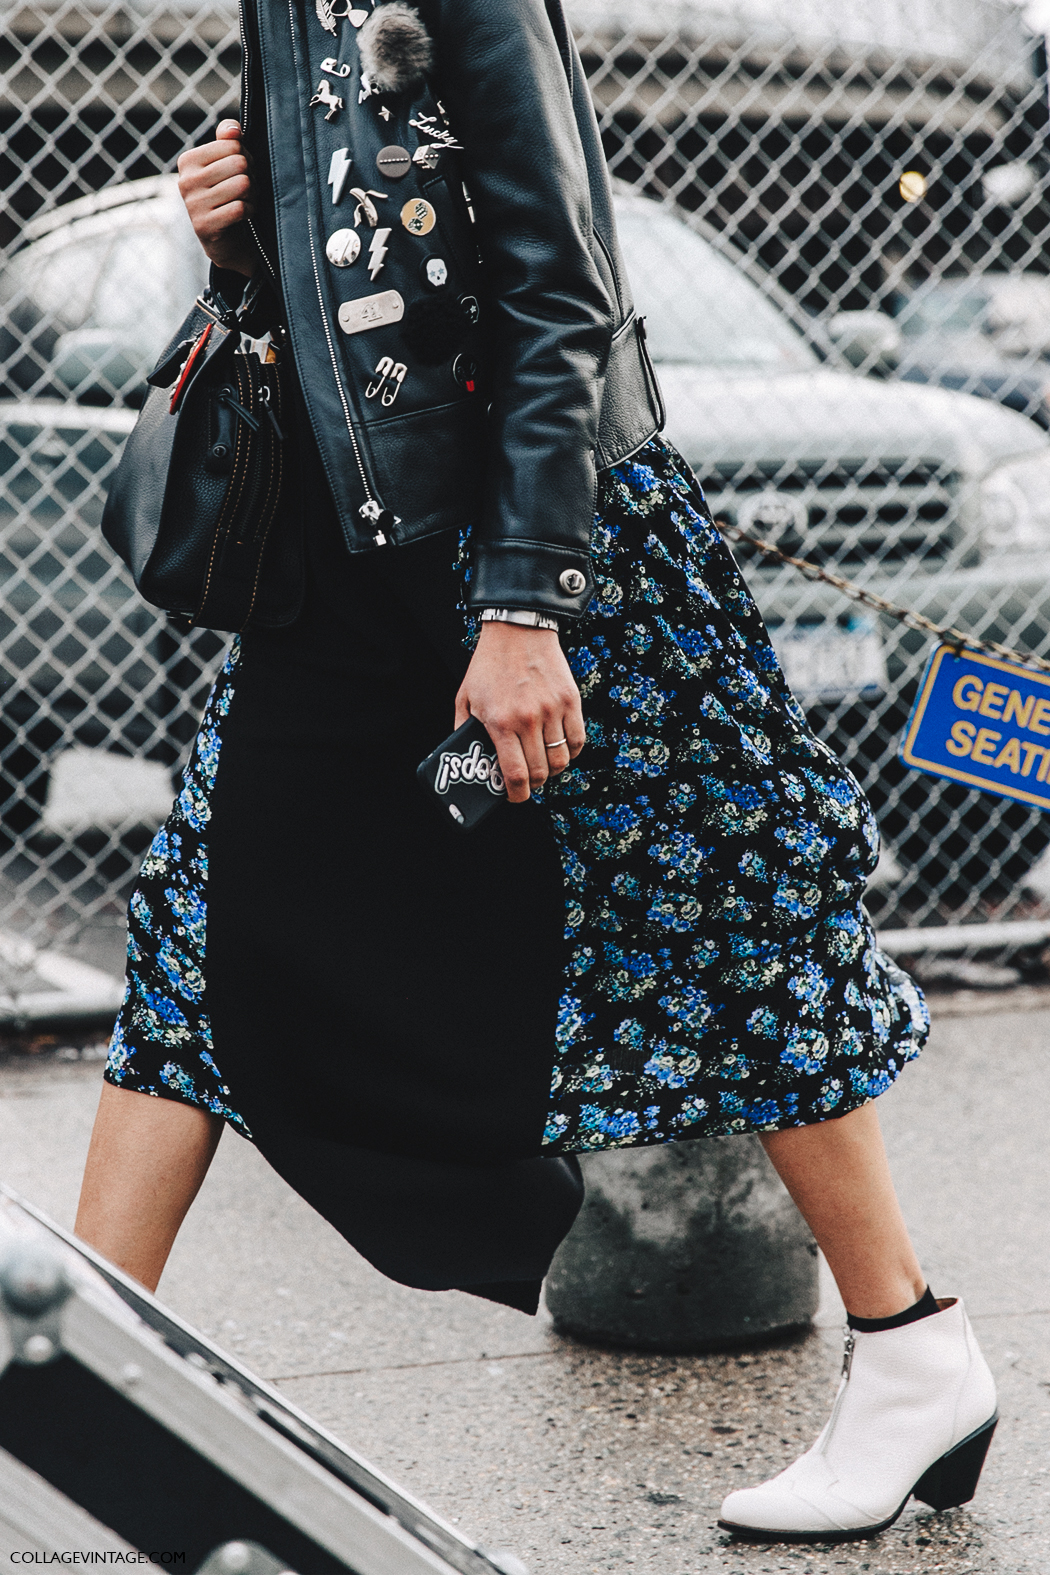 NYFW-New_York_Fashion_Week-Fall_Winter-17-Street_Style-White_Boots-Floral_Dress-Leather_Jacket-Coach-1